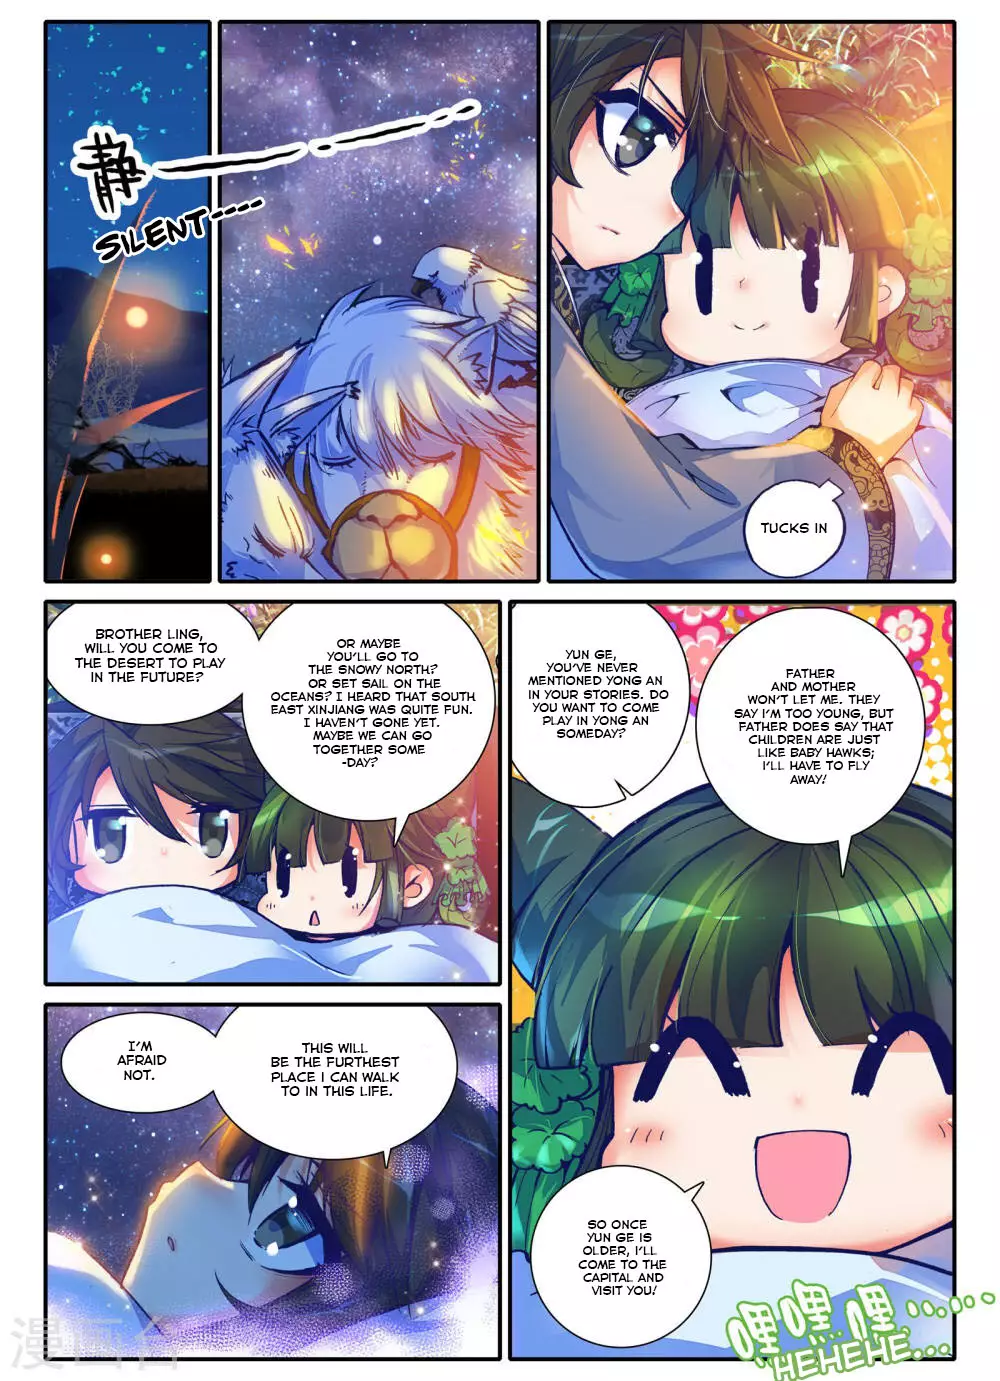 Song In Cloud - 2 page 20